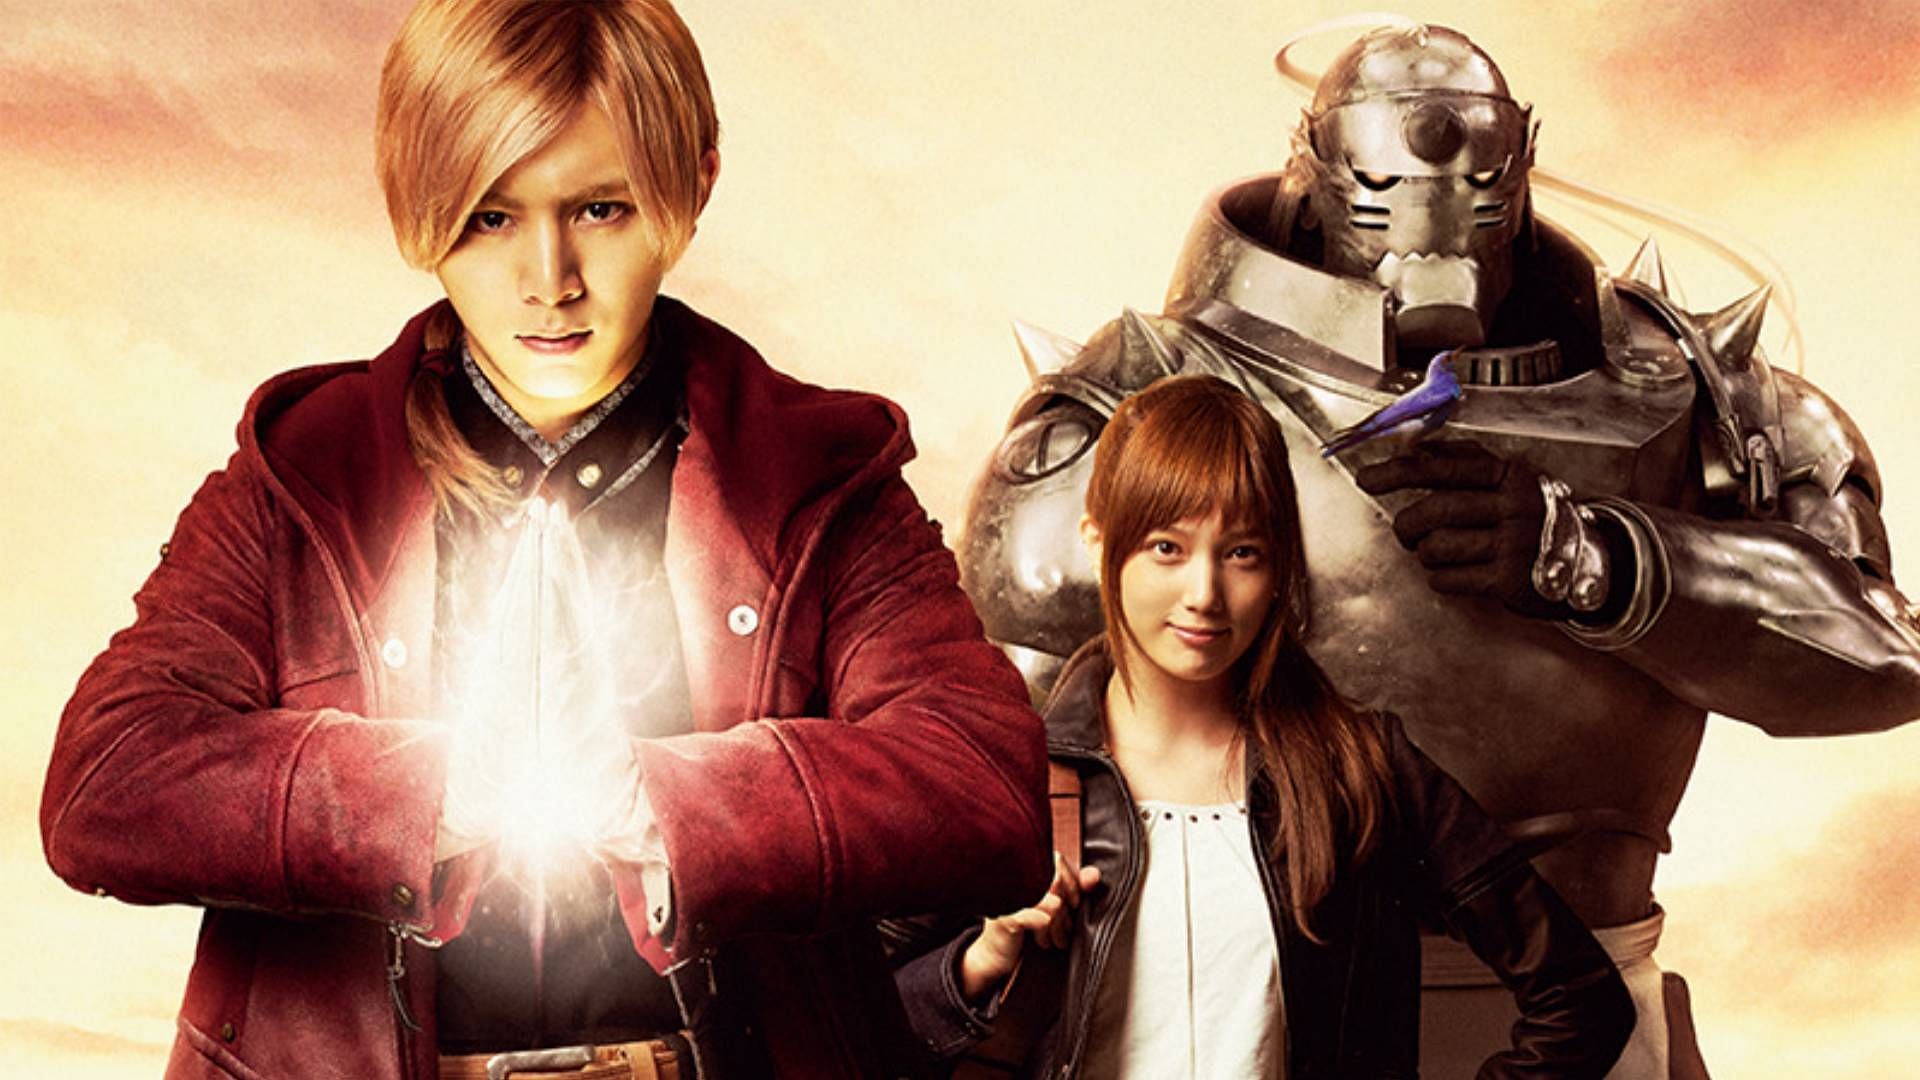 From left to right, the live-action versions of Edward Elric, Winry Rockbell, and Alphonse Elric (Image via Square Enix OXYBOT Inc.)